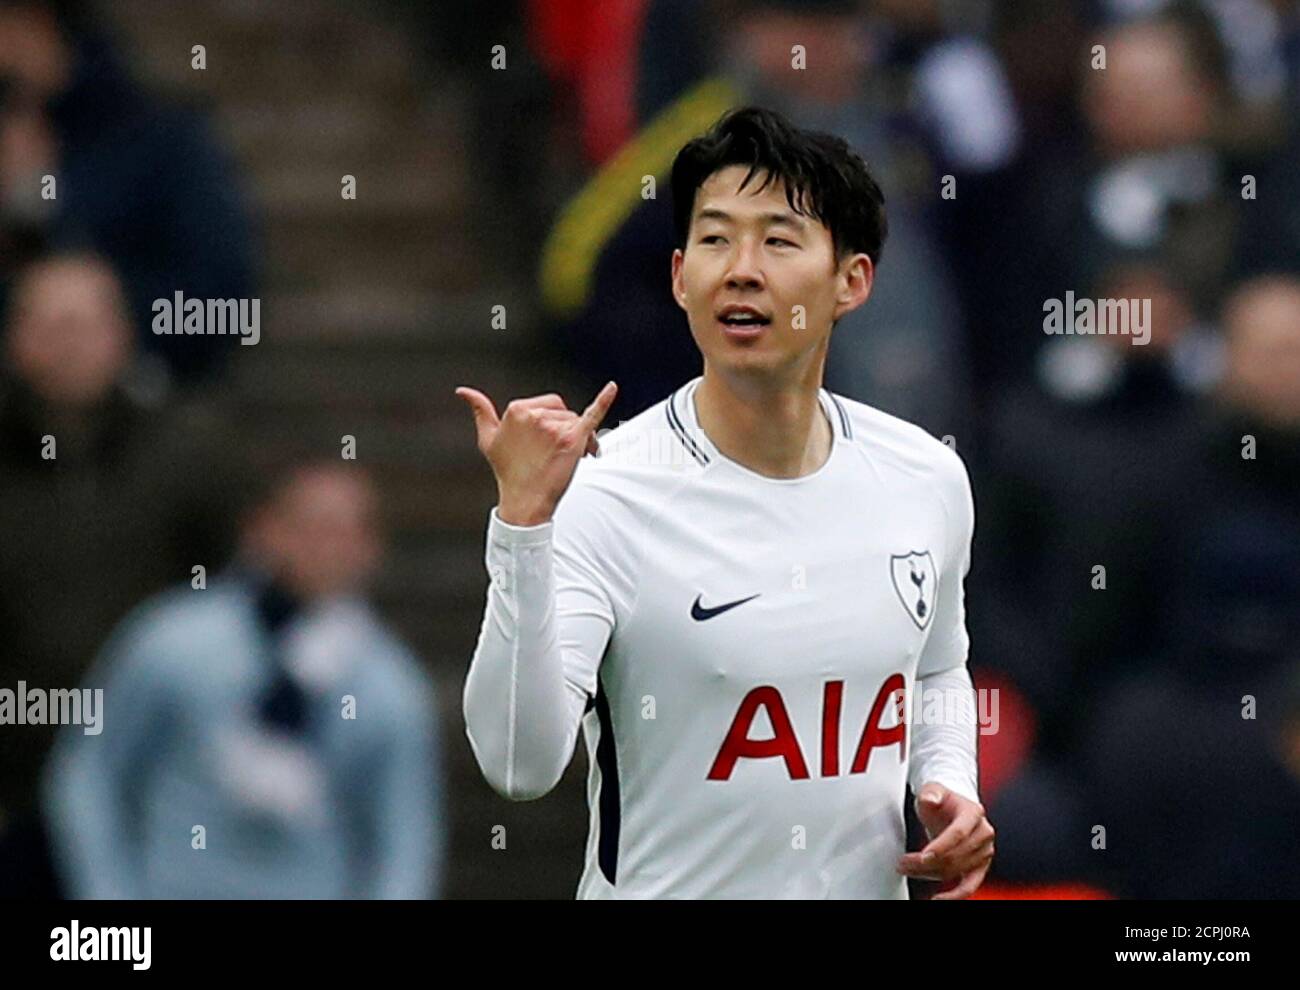 Soccer Football - Premier League - Tottenham Hotspur vs Huddersfield Town - Wembley Stadium, London, Britain - March 3, 2018   Tottenham's Son Heung-min celebrates scoring their first goal   REUTERS/Eddie Keogh    EDITORIAL USE ONLY. No use with unauthorized audio, video, data, fixture lists, club/league logos or 'live' services. Online in-match use limited to 75 images, no video emulation. No use in betting, games or single club/league/player publications.  Please contact your account representative for further details. Stock Photo